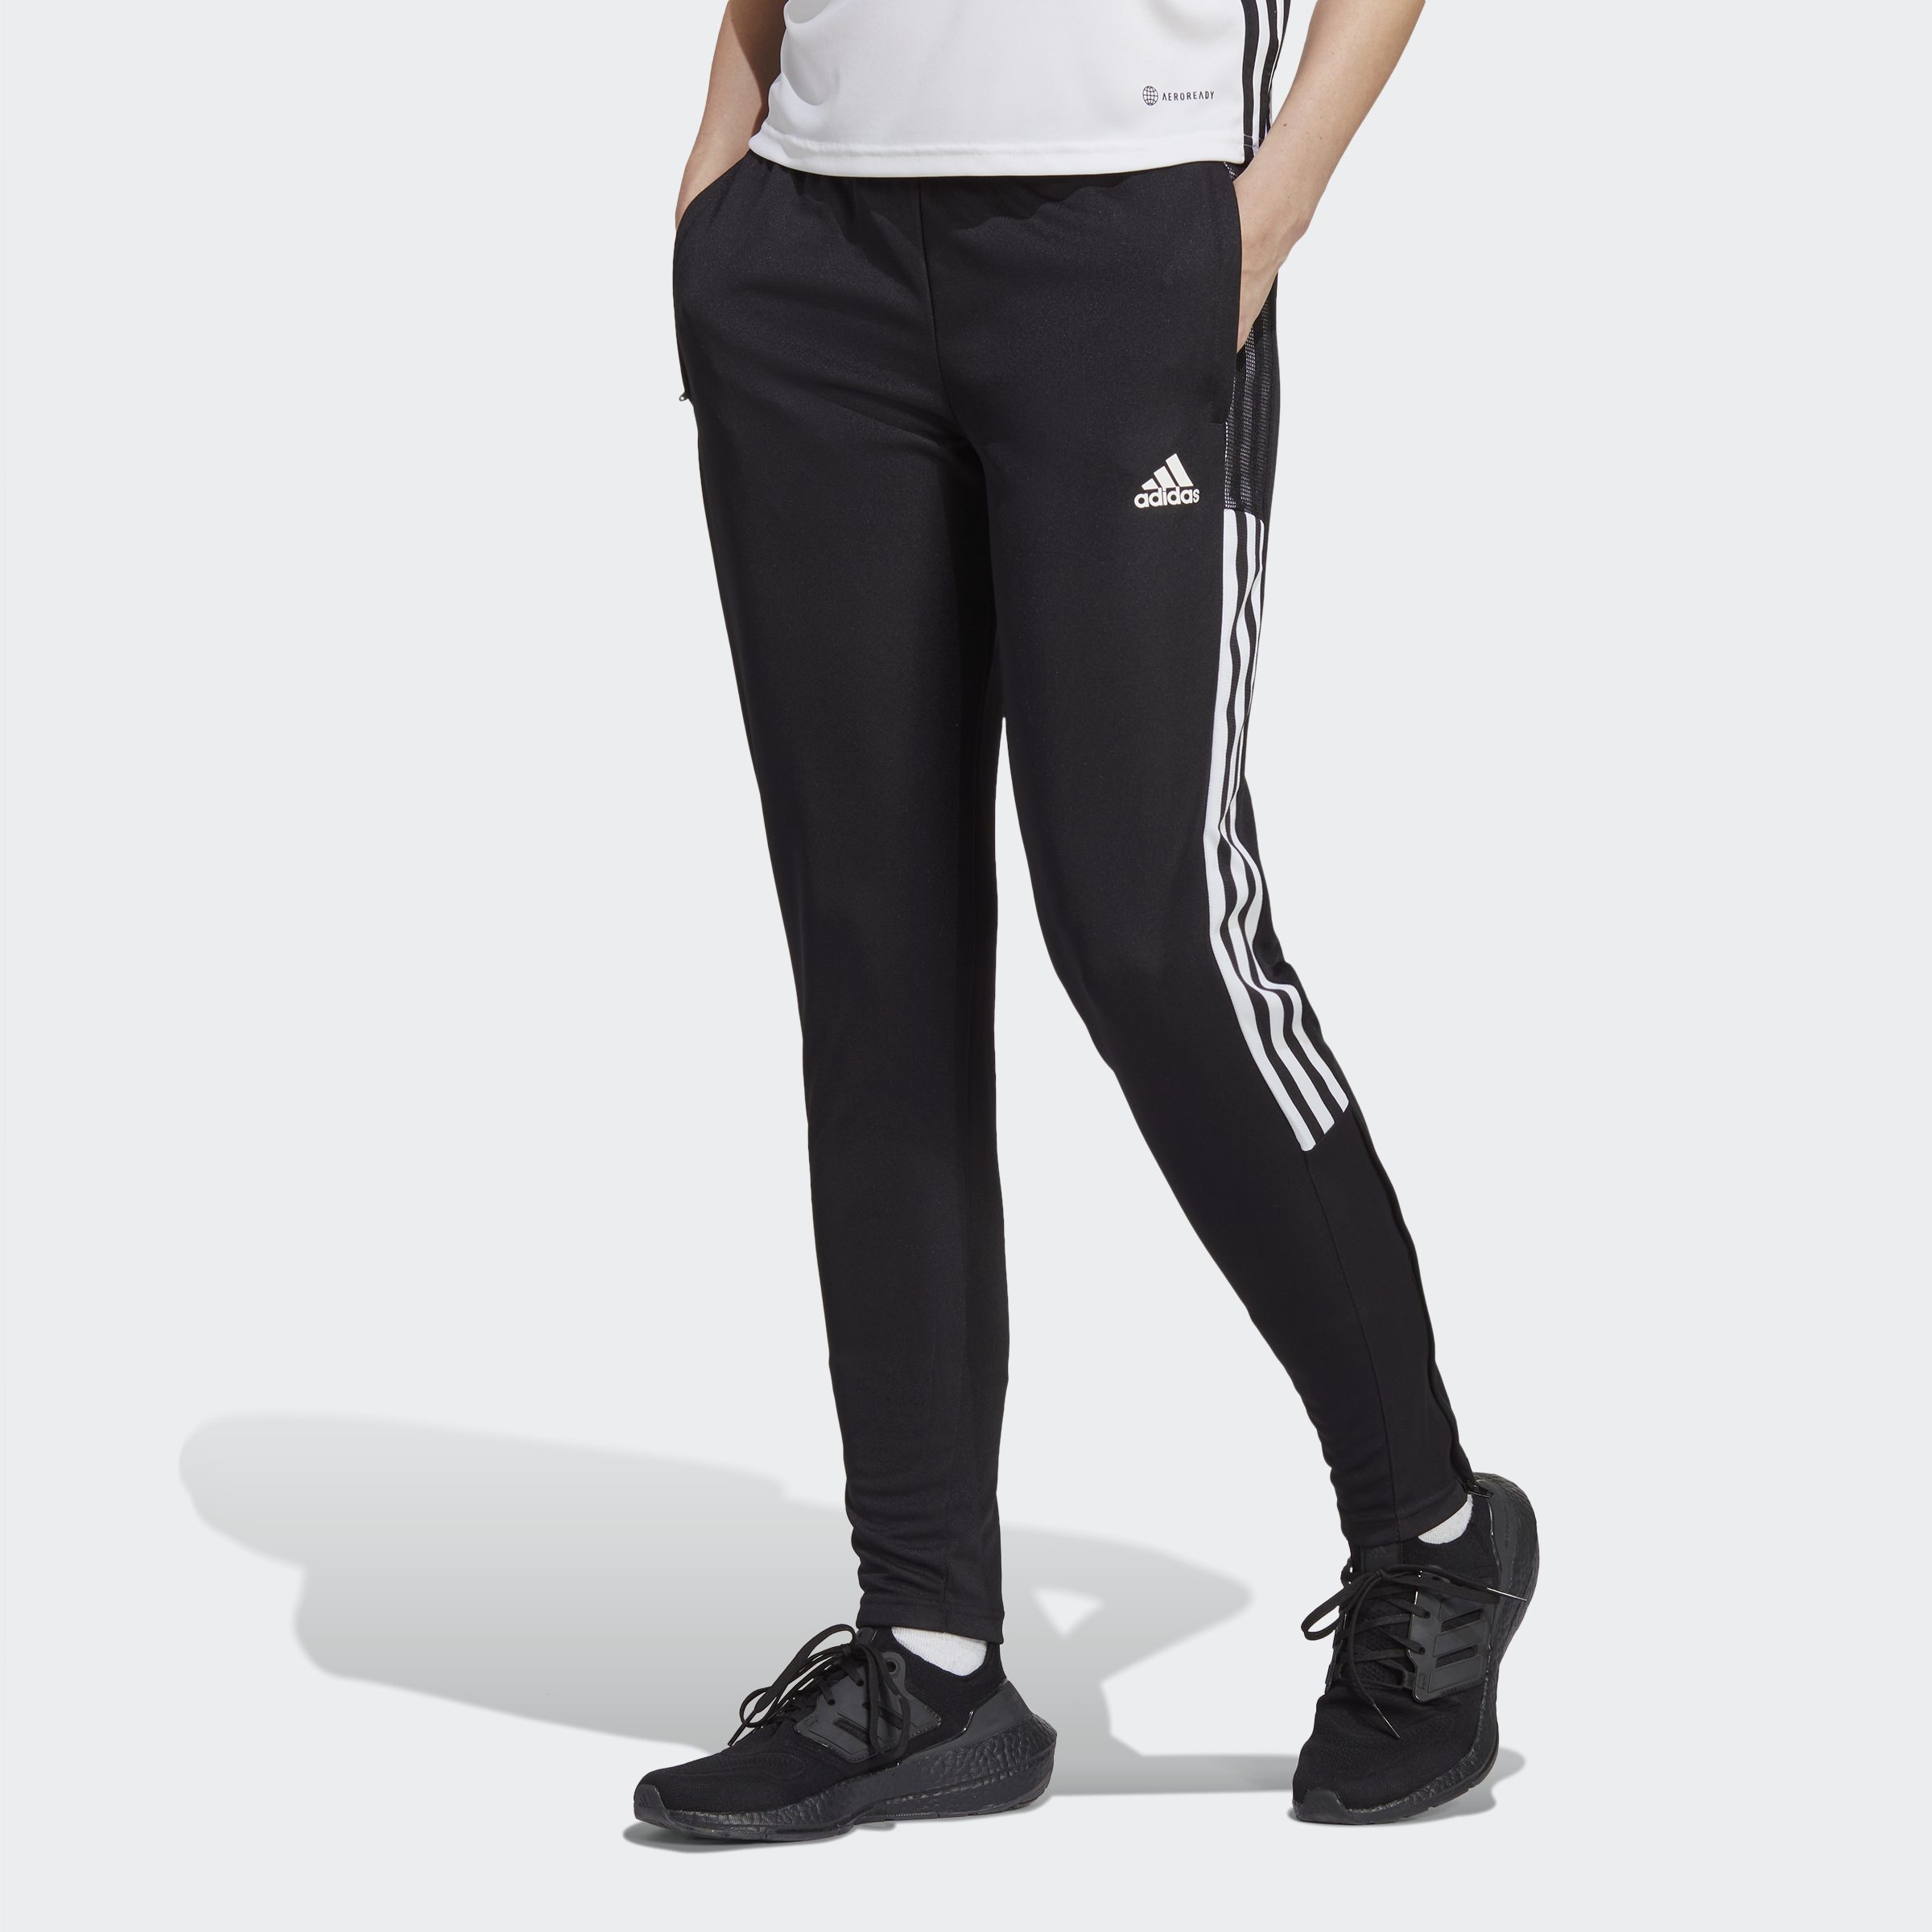 Buy Men High Performance Track Pants Online in India | aguante.in